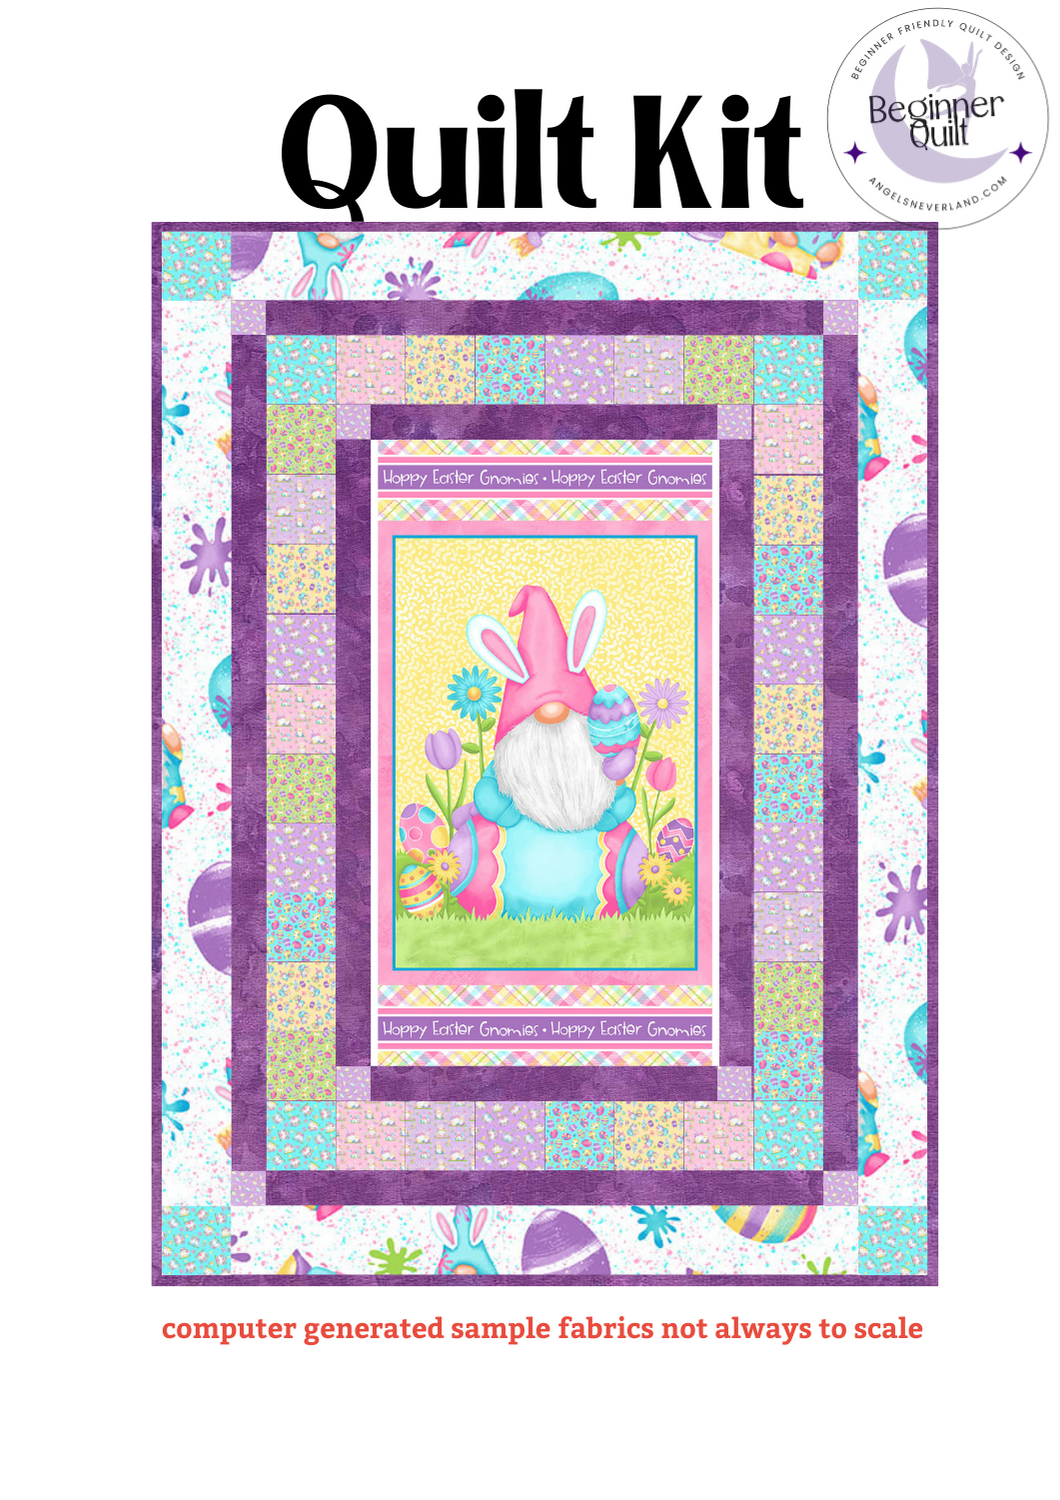 Hoppy Easter Gnomies Easy DIY Beginner QUILT KIT with Picture This Pattern